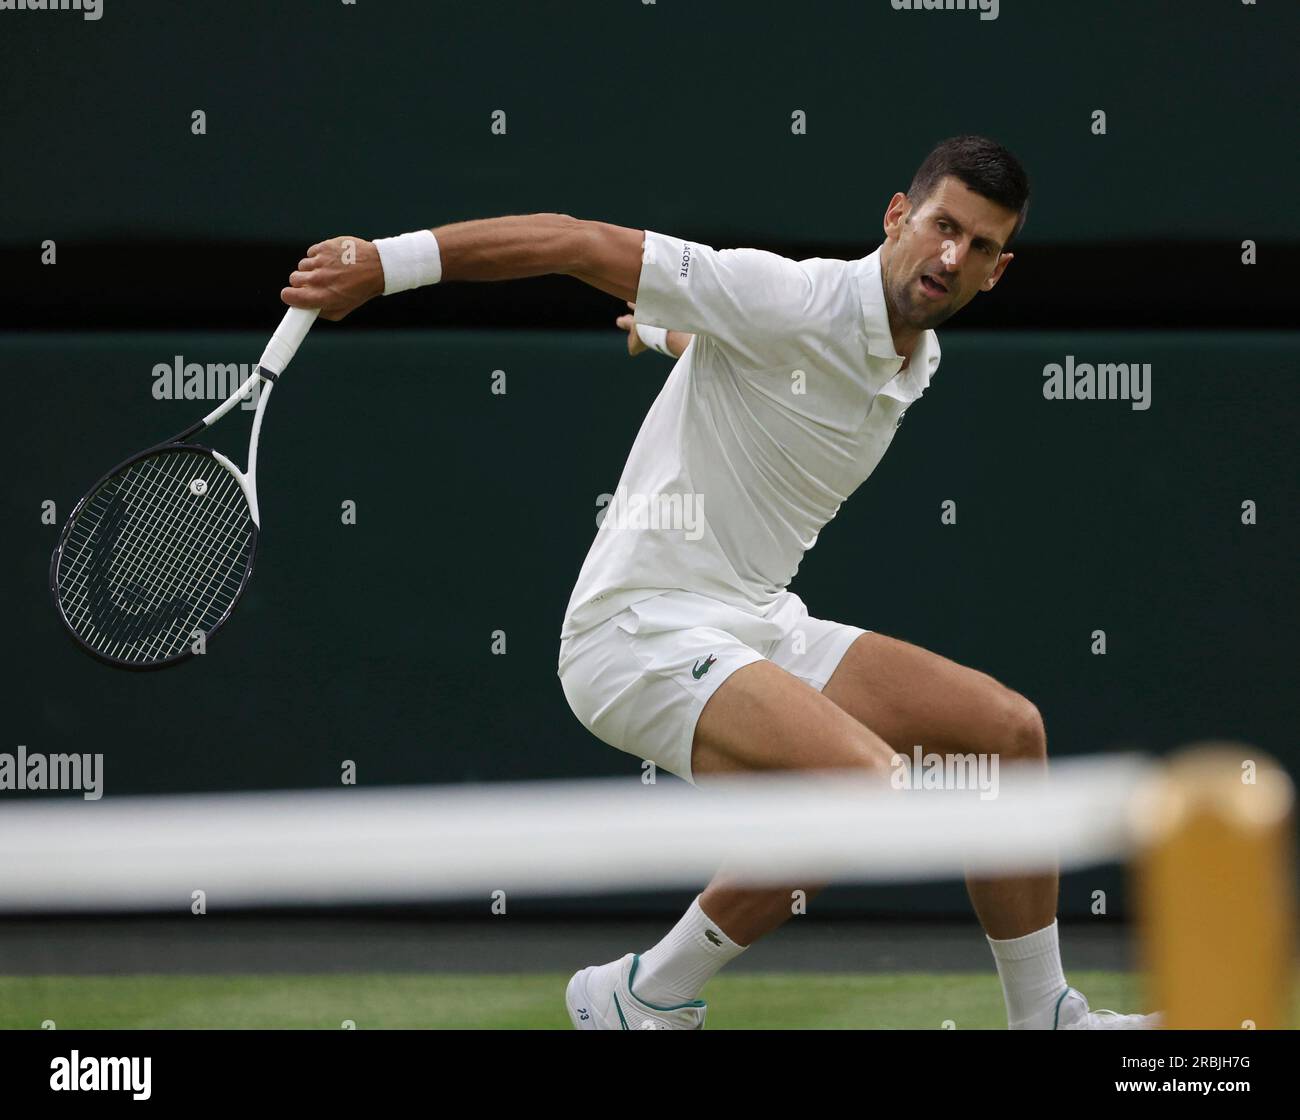 Novak Djokovic of Serbia hits a ball during the gentlemens singles third-round match against Stan Wawrinka of Switzerland in the Championships, Wimbledon at All England Lawn Tennis and Croquet Club in London,